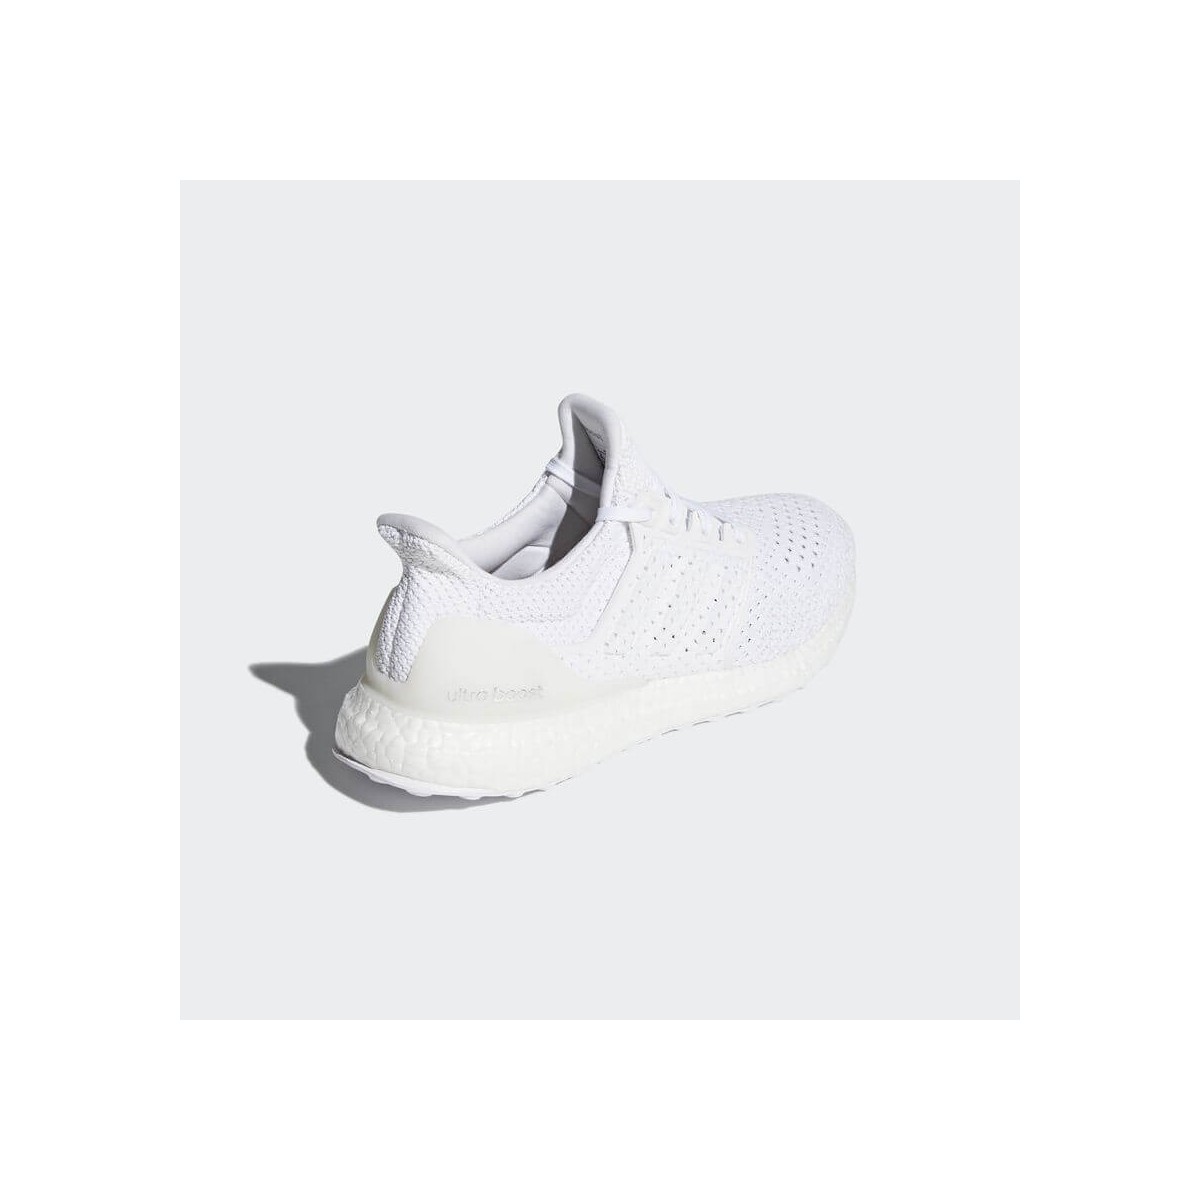 Adidas Ultra Boost Clima Shoes